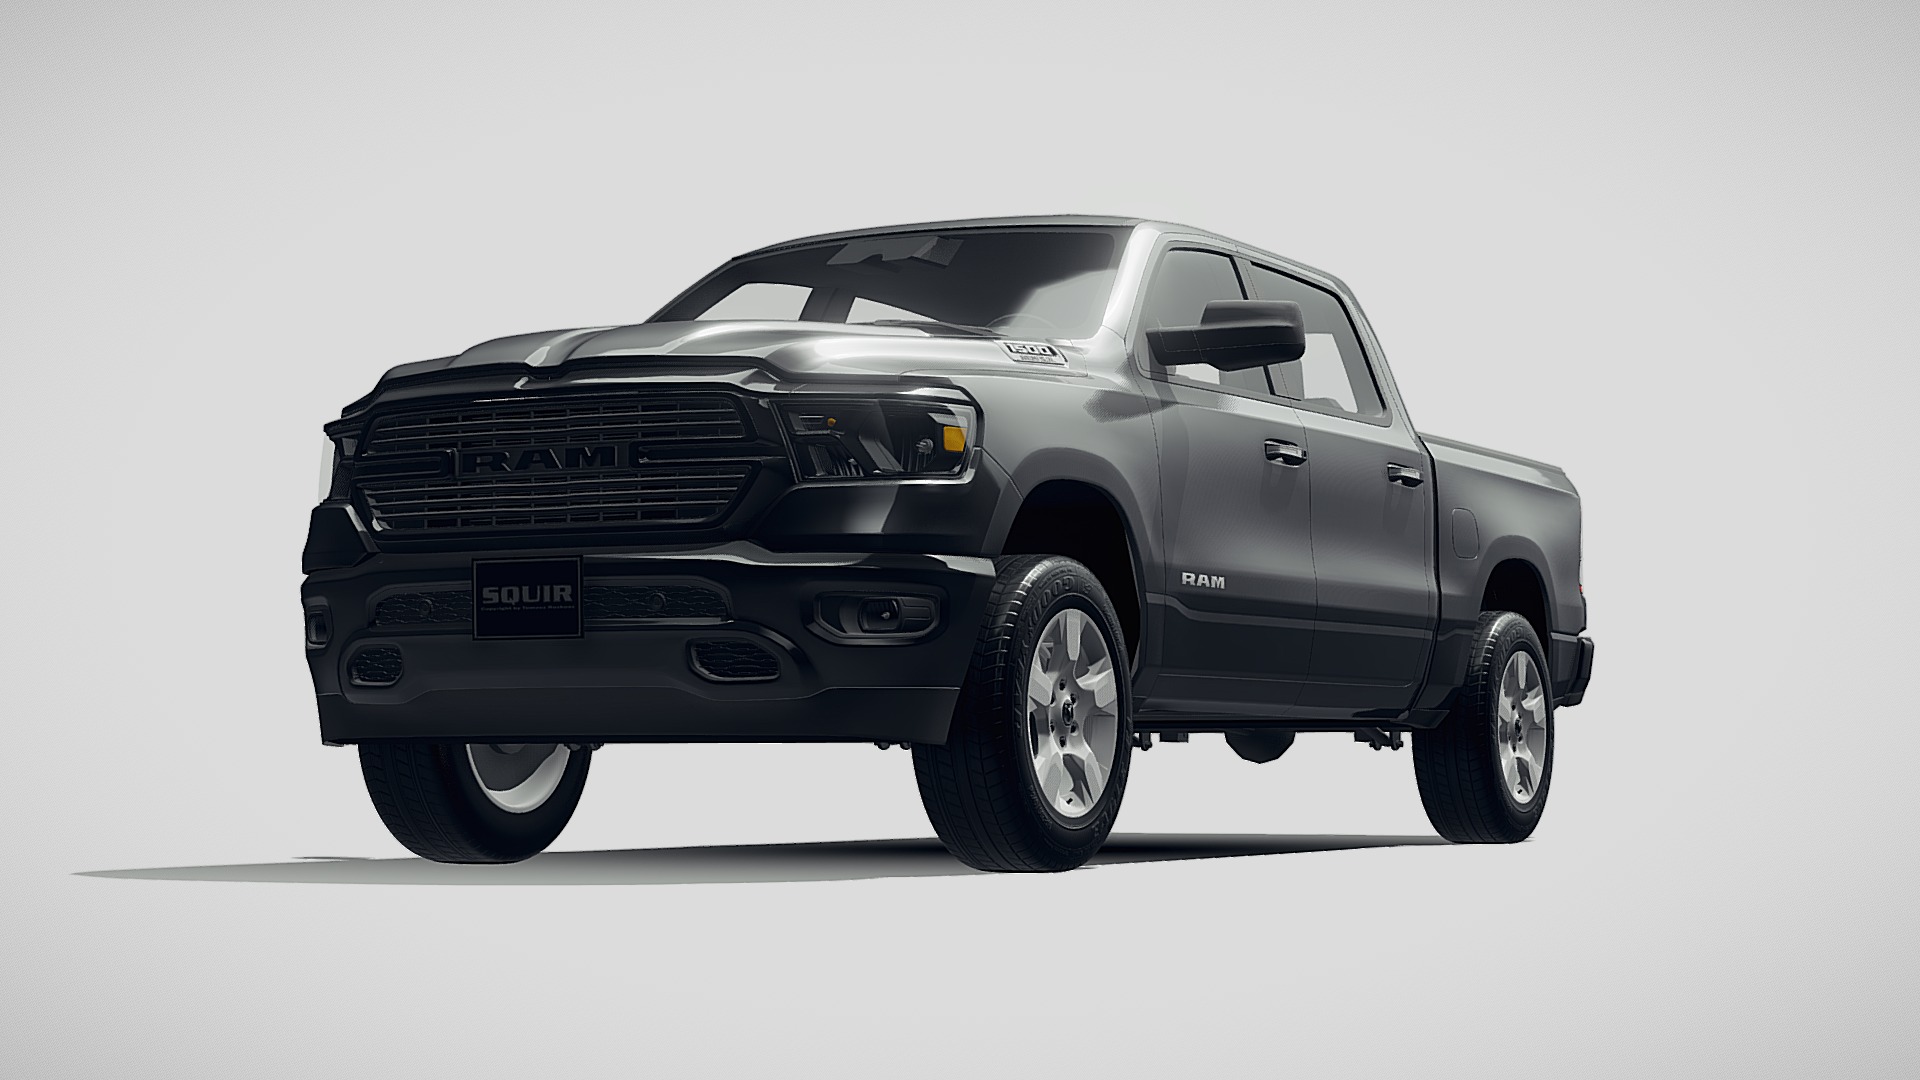 3D model Dodge Ram BigHorn 2019 - This is a 3D model of the Dodge Ram BigHorn 2019. The 3D model is about a black car with a white background.